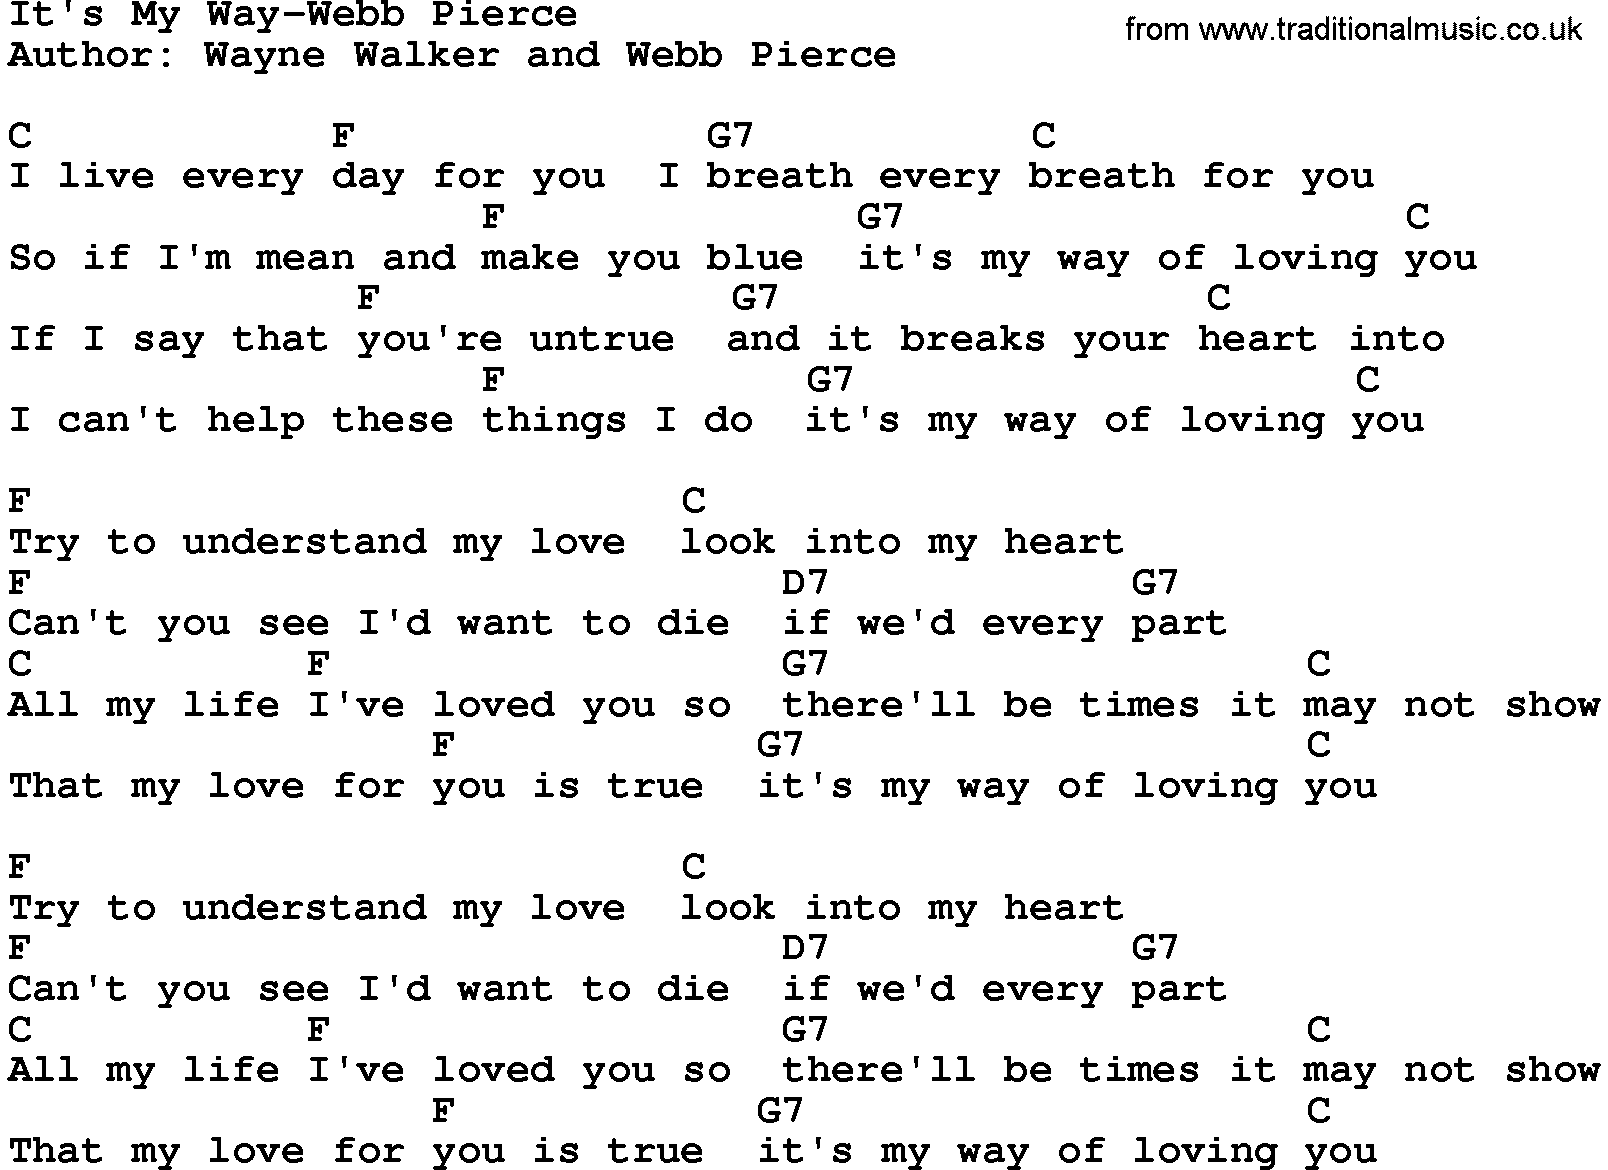 Country music song: It's My Way-Webb Pierce lyrics and chords